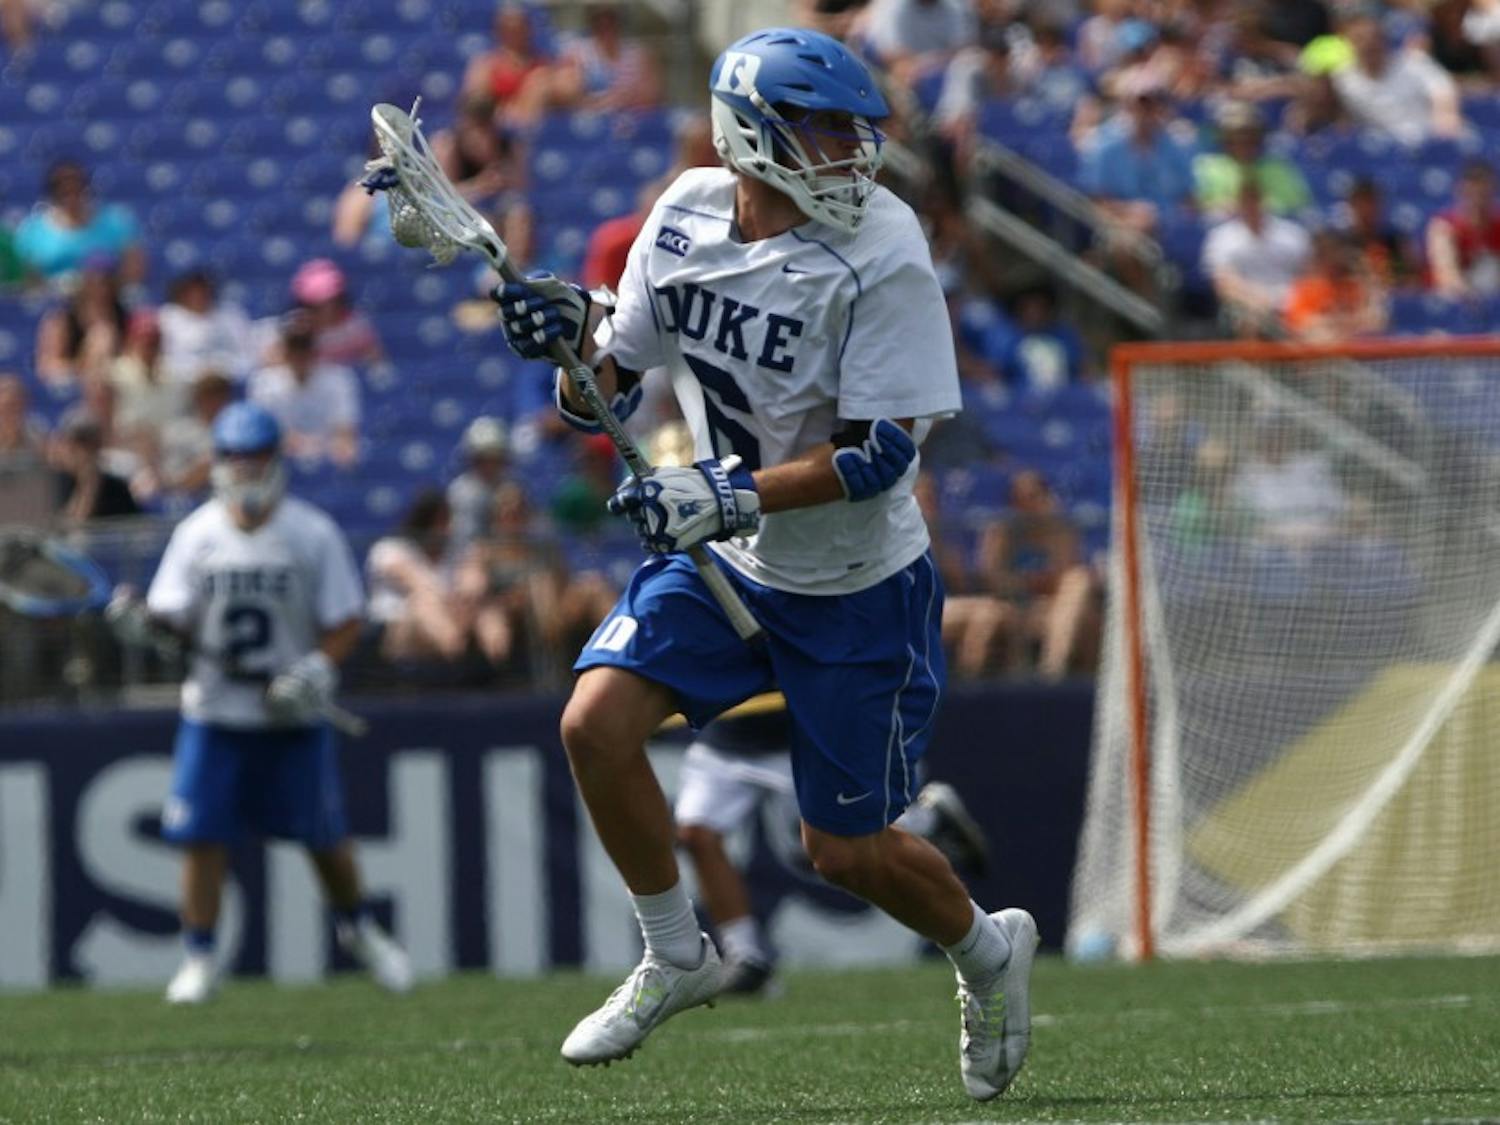 Senior Will Haus is a two-time Honorable Mention All-America and will look to lead the Blue Devils to their third straight national title